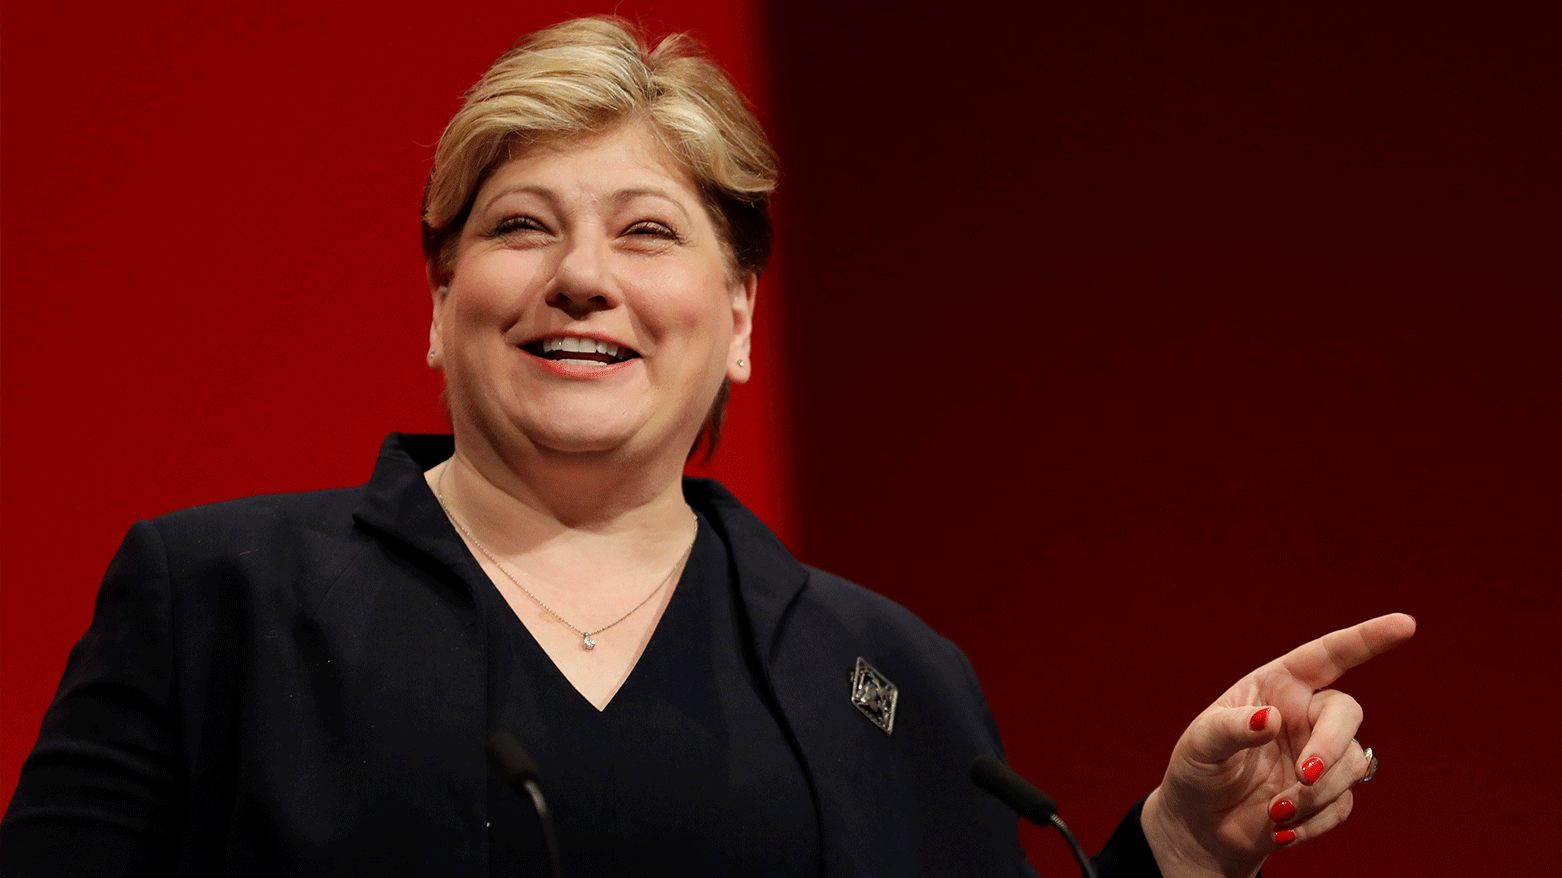 Emily Thornberry, a UK parliament member of the Labour Party. (Photo: AP)